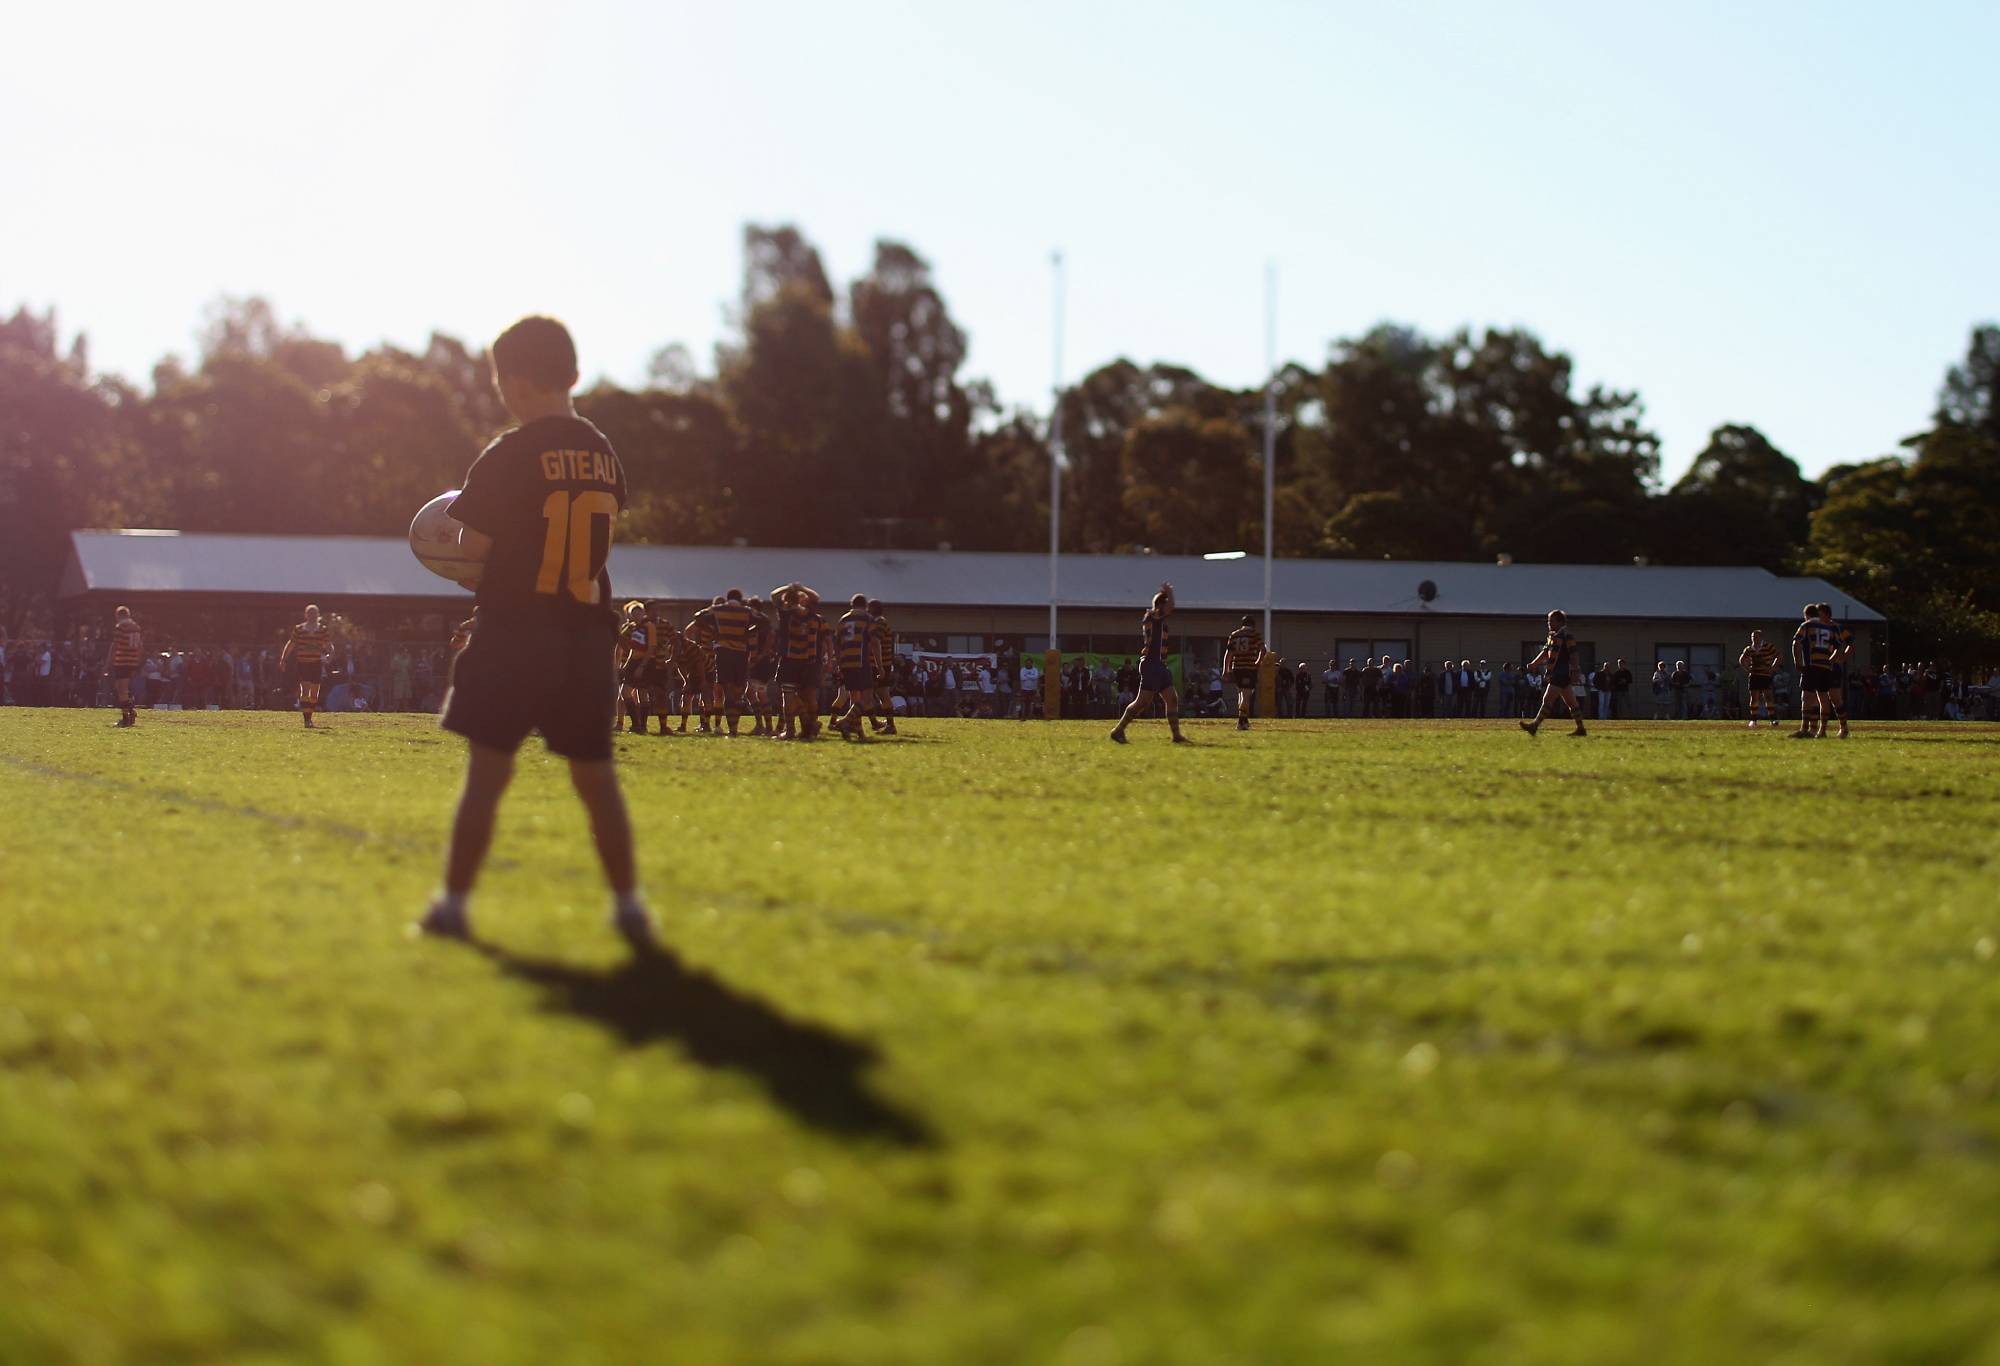 The ball boy wearing a Giteau number 10 shirt watches on during the round 17 third division NSW Suburban Rugby Union match between Balmain and Epping at Blackmore Park on August 14, 2010 in Sydney, Australia. (Photo by Mark Kolbe/Getty Images)